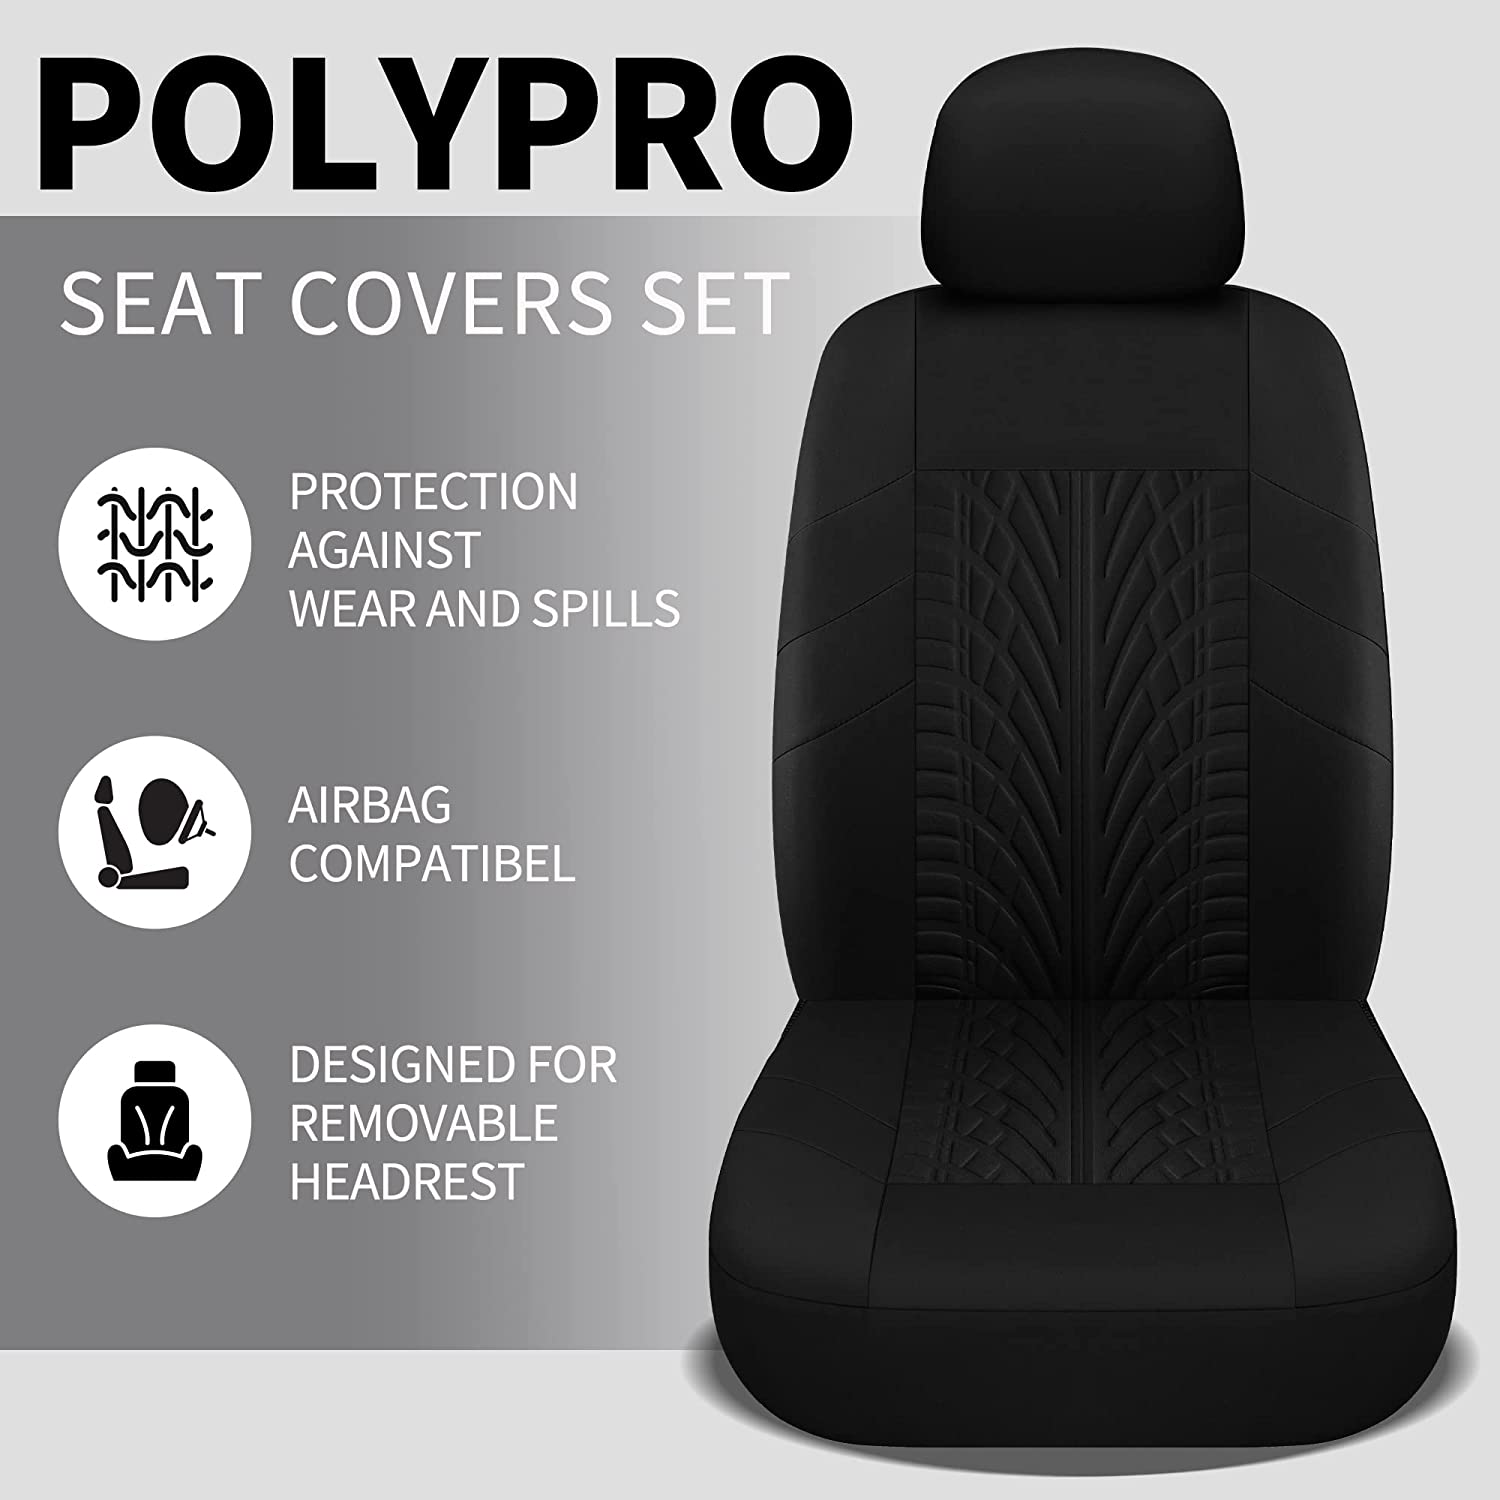 Car Seat Covers Front Pair, Universal Cloth Front Seat Covers for Car, Breathable and Washable Seat Covers for SUV, Sedan, Van, Automotive Interior Covers, Airbag Compatible, Custom For Cars